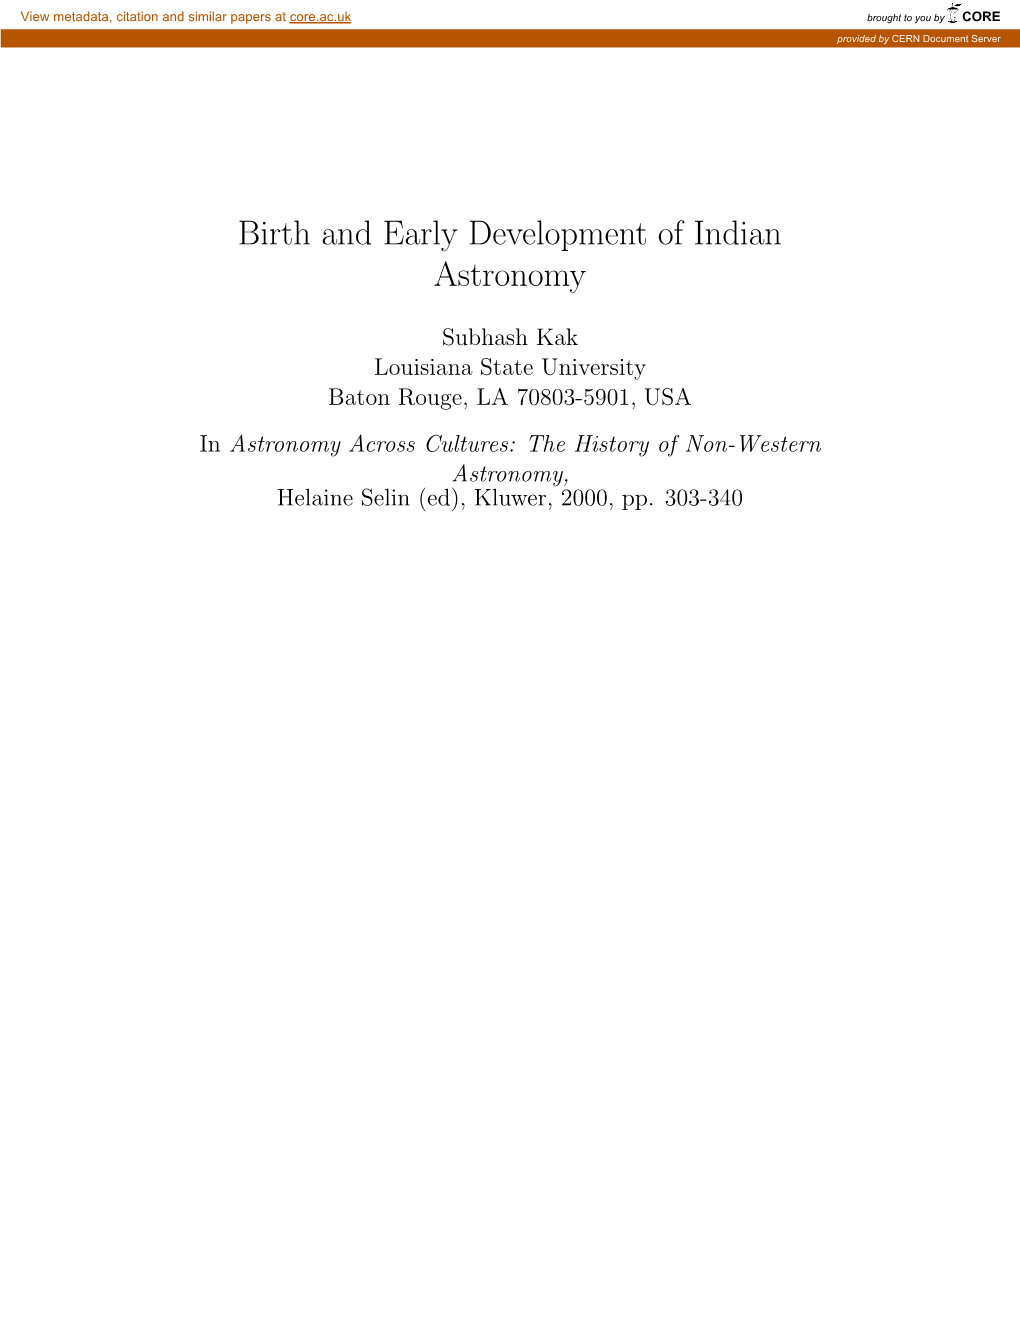 Birth and Early Development of Indian Astronomy